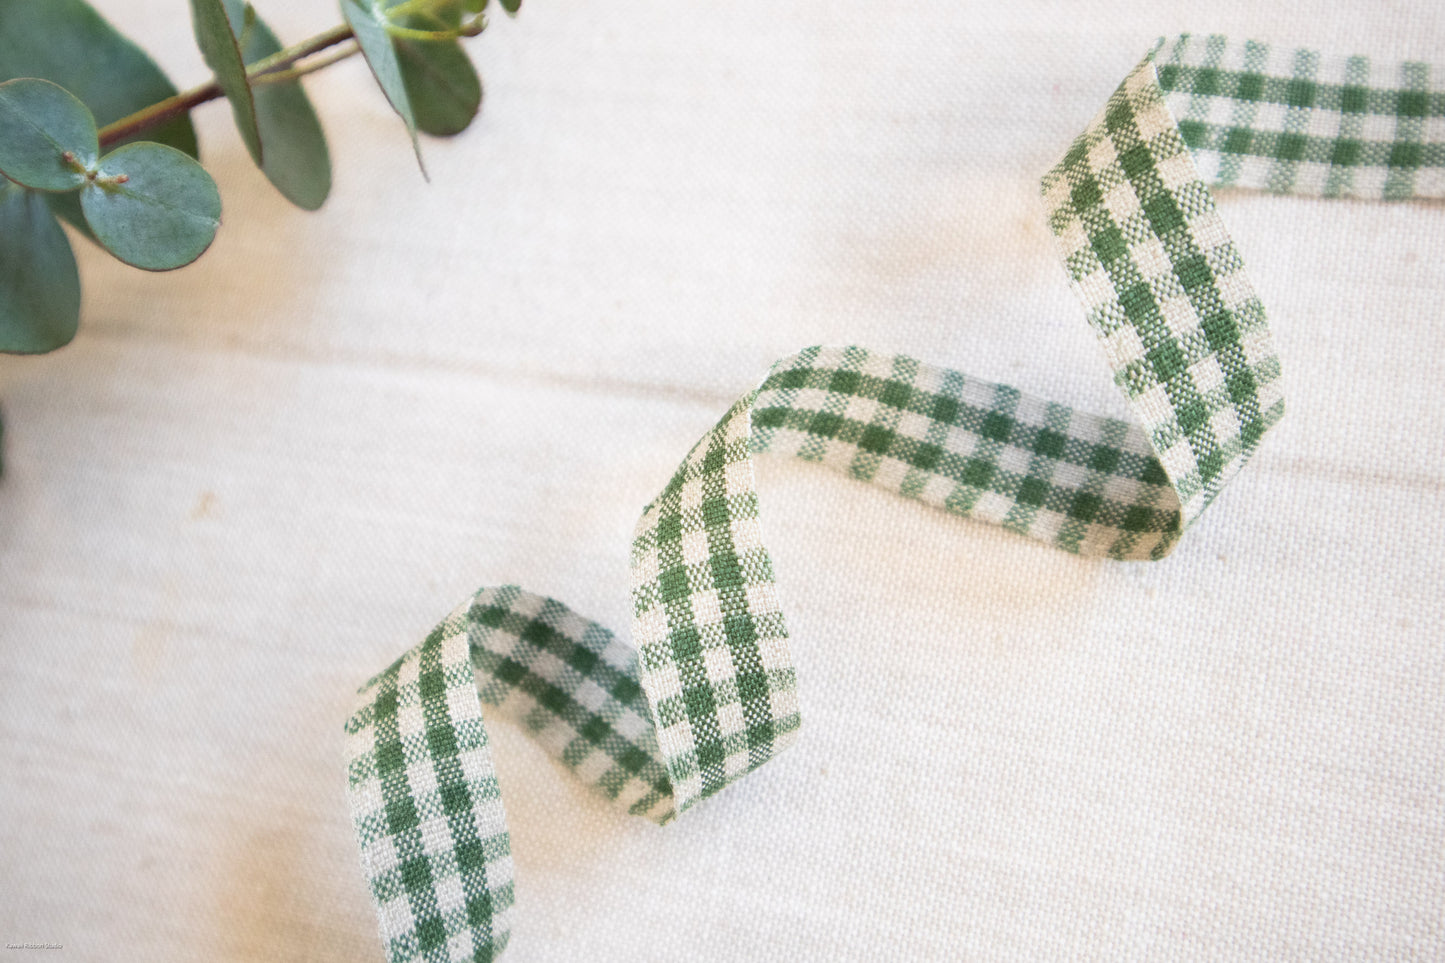 20mm Gingham check ribbon/ tape in 100% washed linen